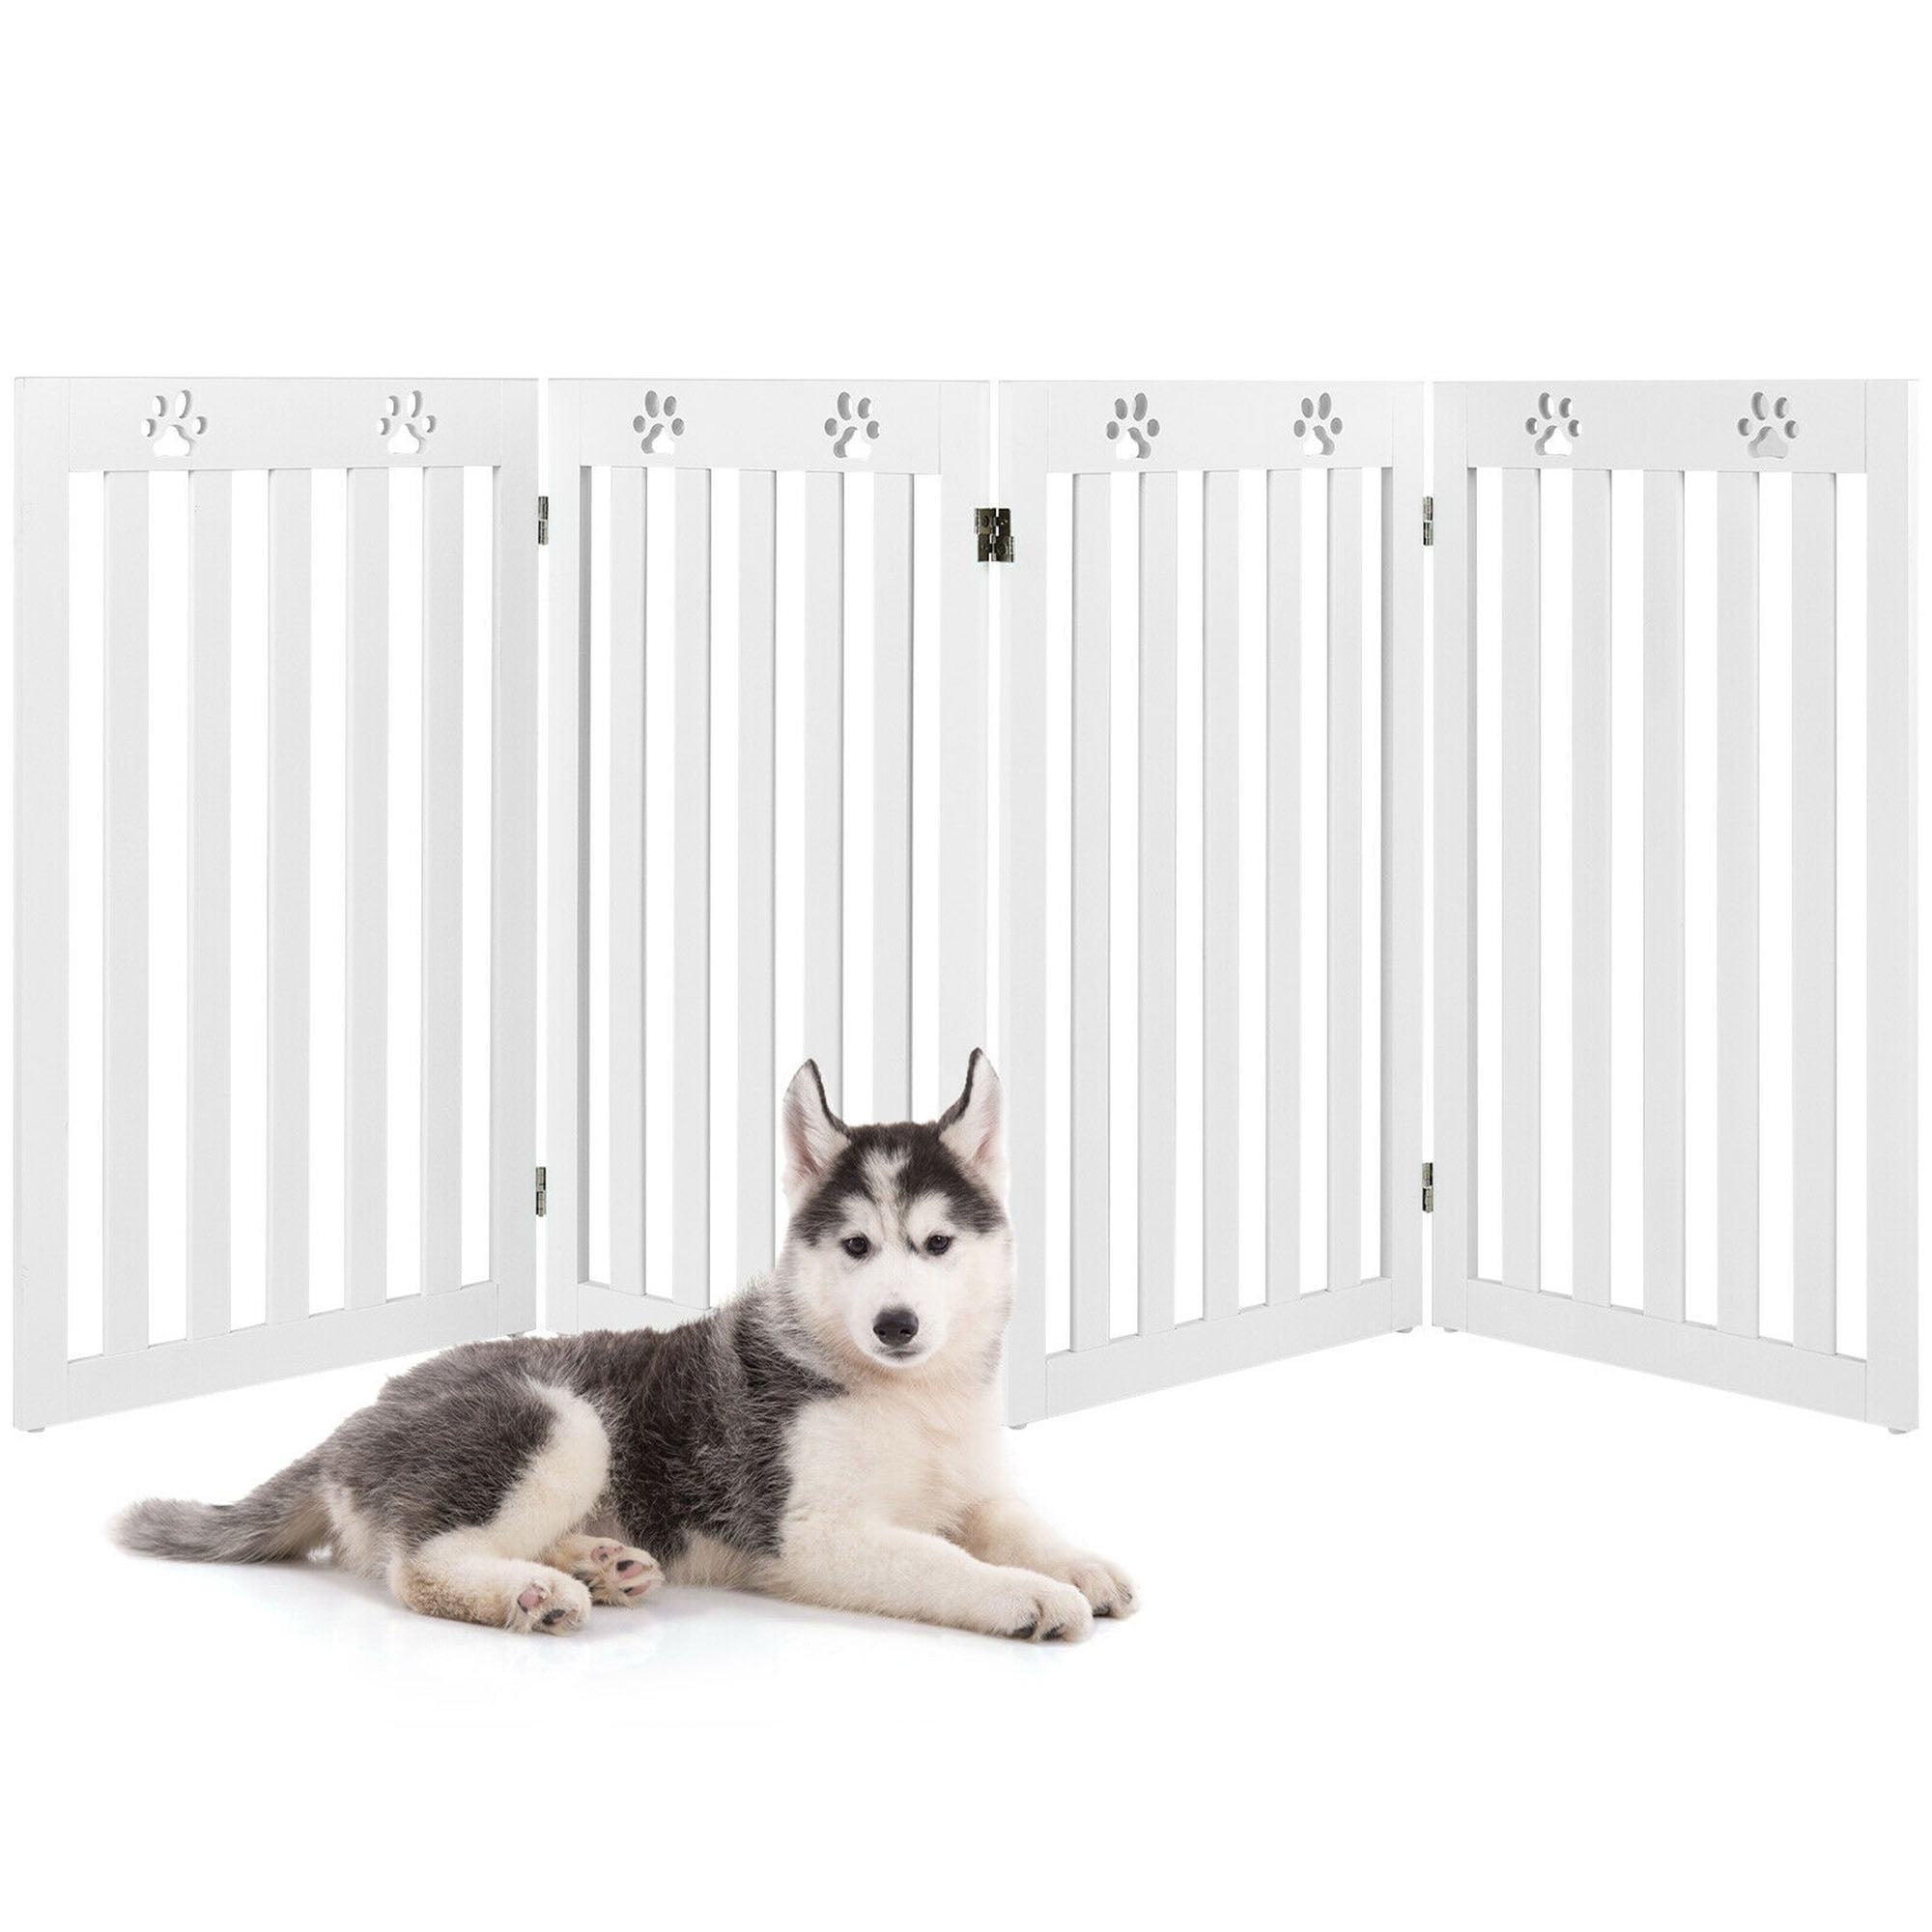 Adjustable Free Stand Pet Dog Cat Puppy Wood Metal Fence Mount Rack Gate Tool 